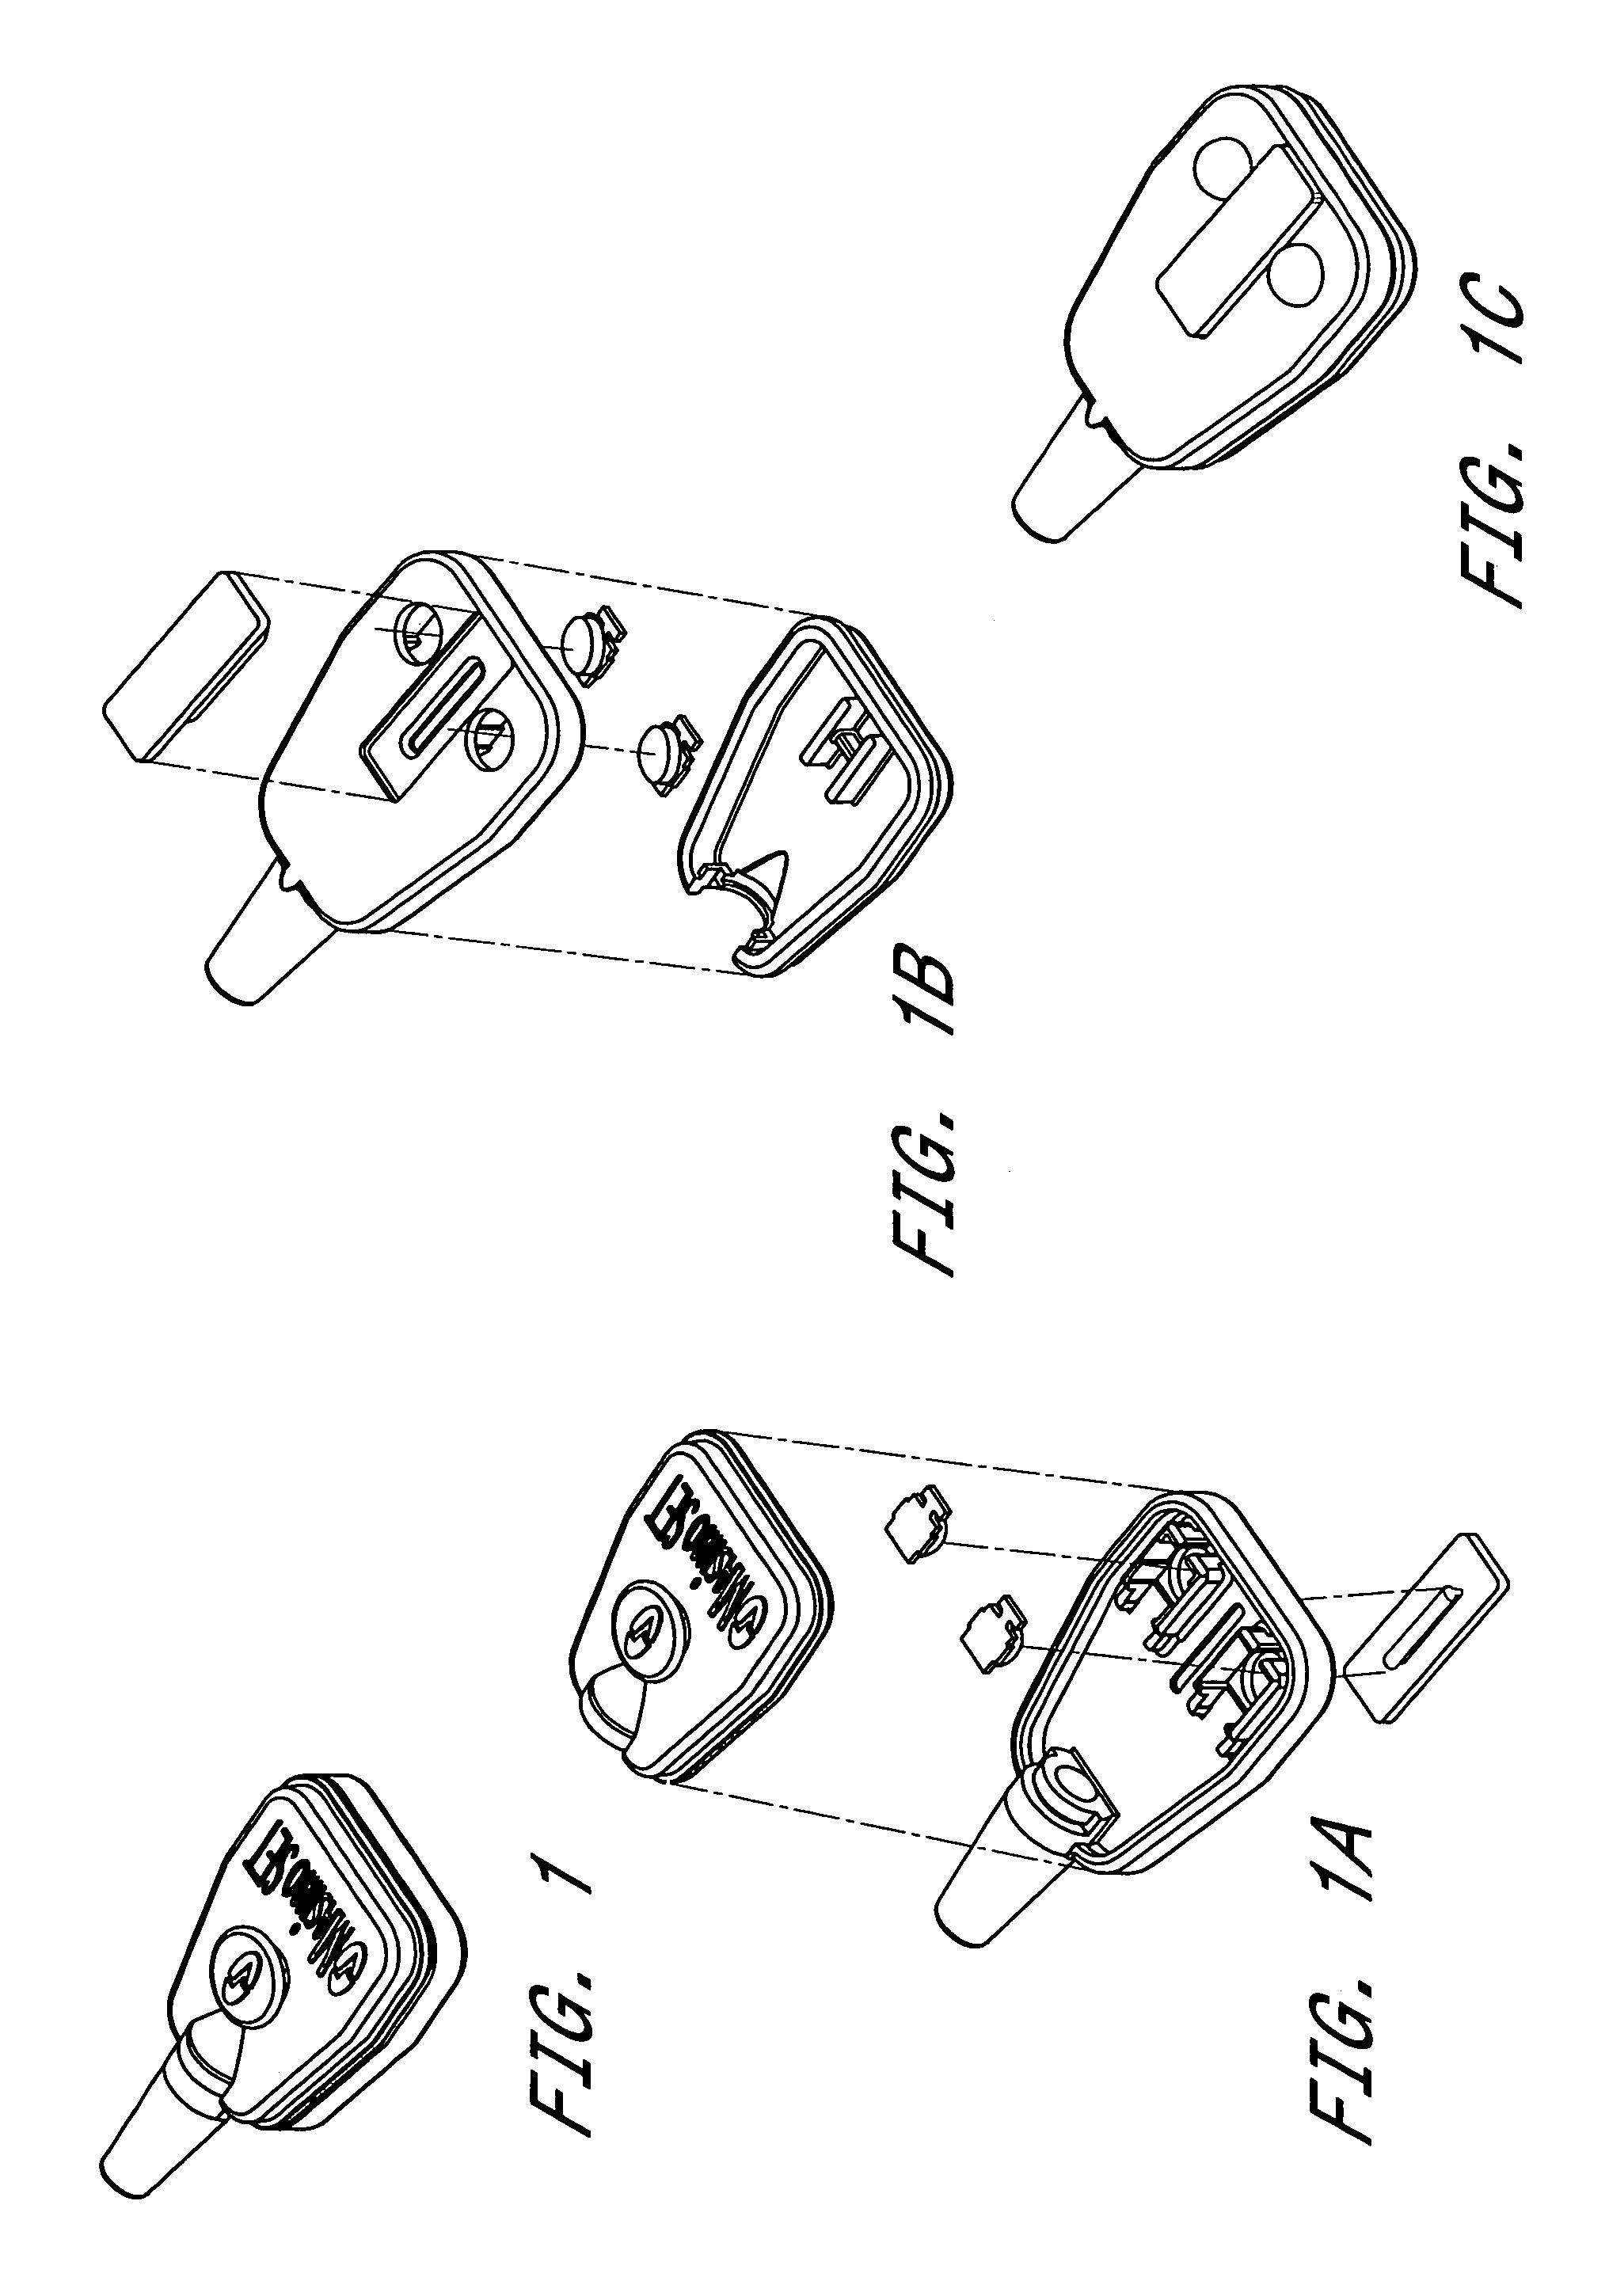 Optical probe including predetermined emission wavelength based on patient type